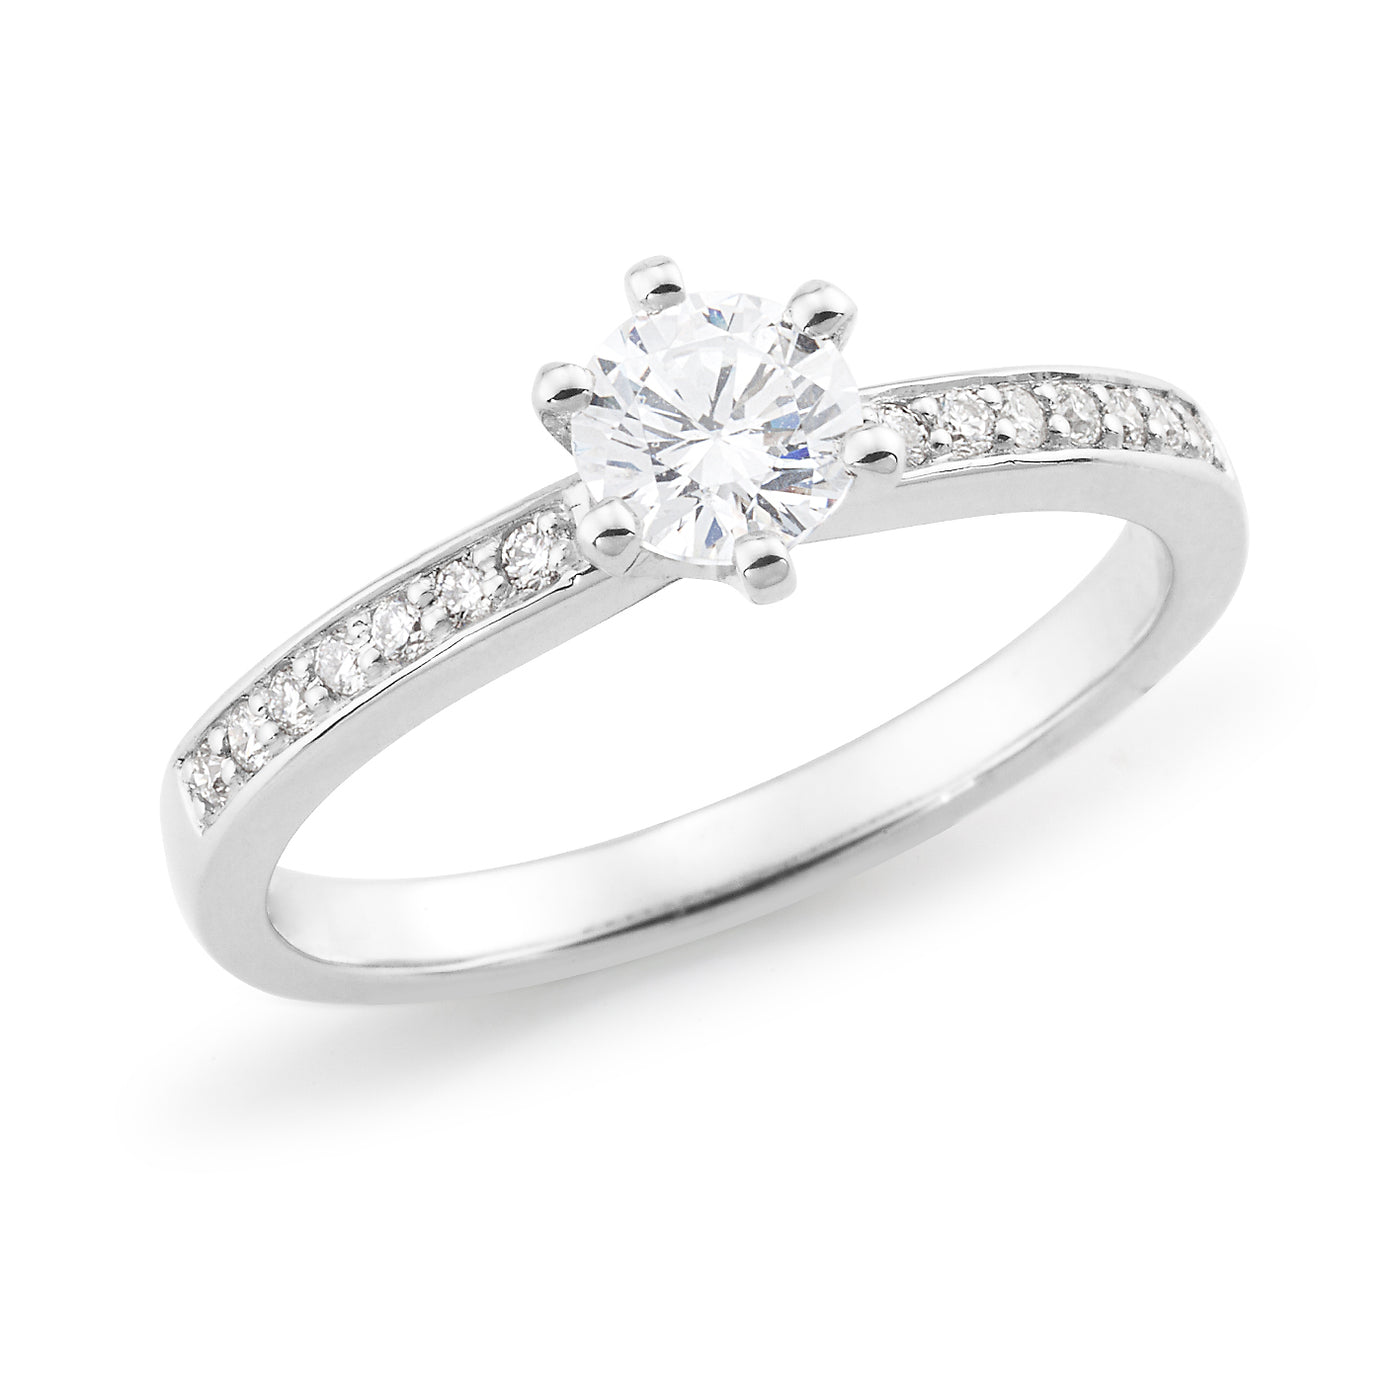 9 Carat White Gold Six Claw Natural Solitaire Diamond Engagement Ring With Bead Set Shoulders